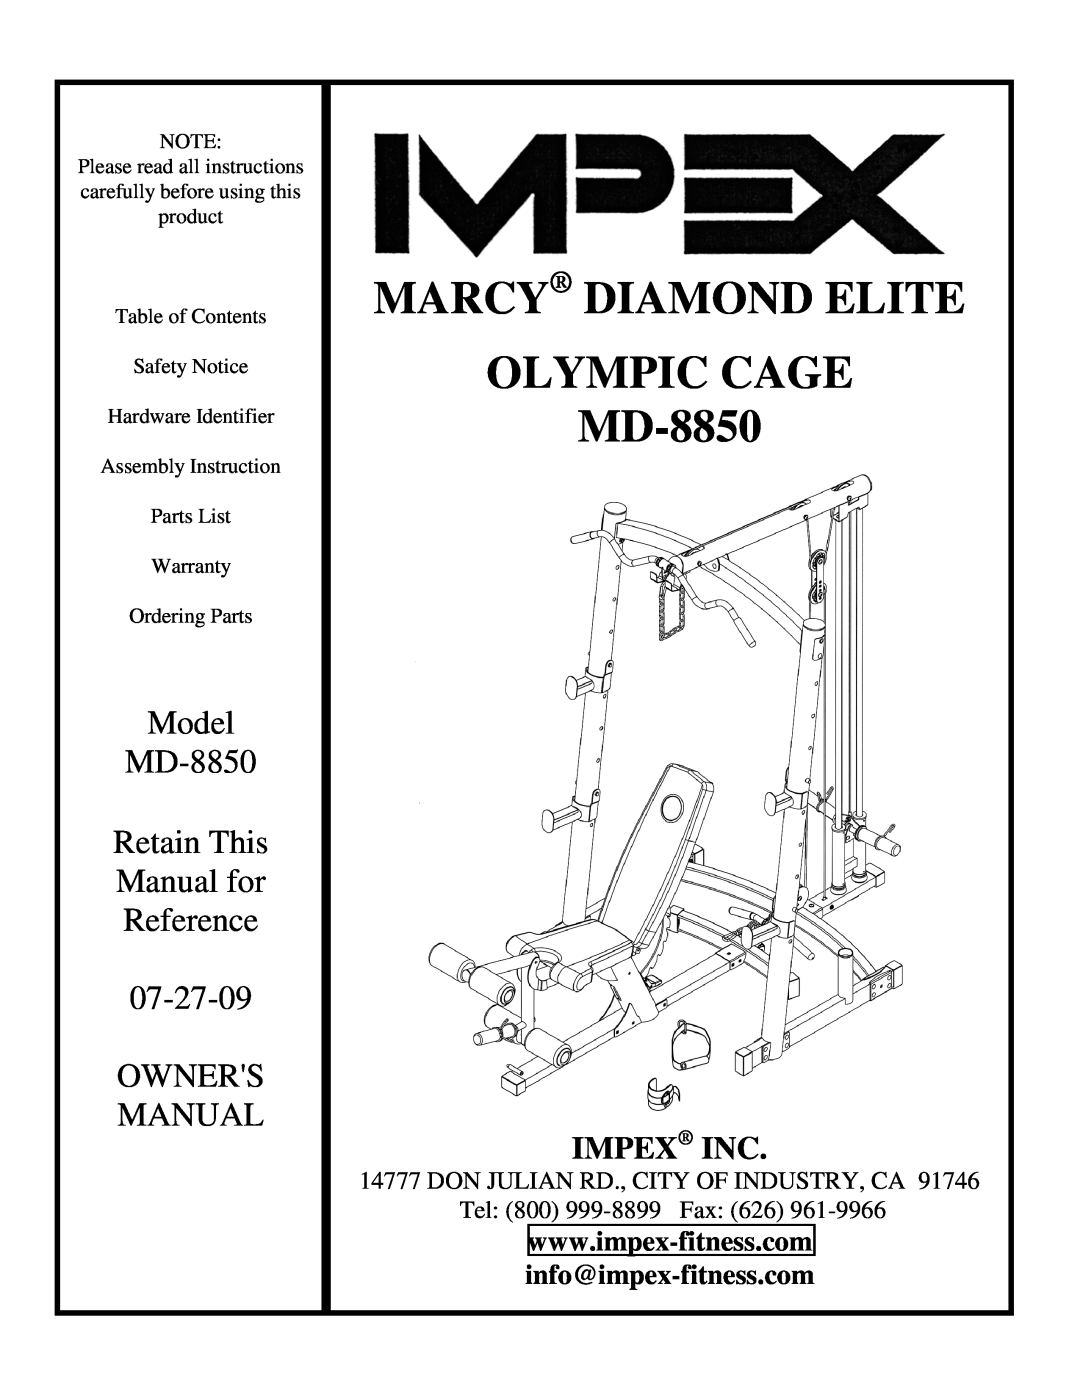 Impex MD-8850 manual info@impex-fitness.com, Marcy Diamond Elite, Olympic Cage, Model, Retain This, Manual for, Reference 